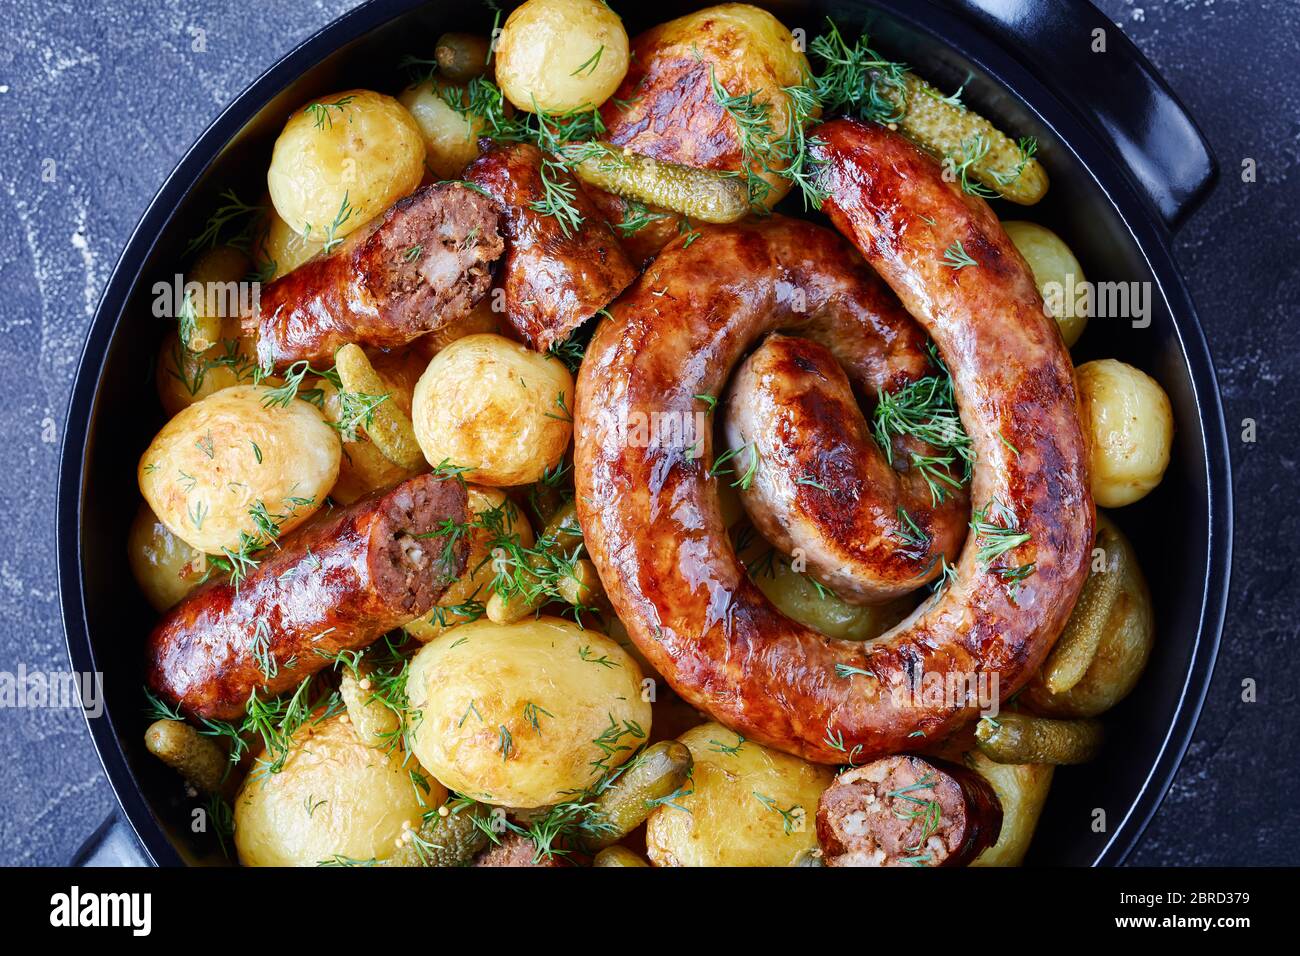 Roasted ring sausage and young potato with gherkins, sprinkled with fresh dill on a black dish on a dark concrete background, top view,  close-up Stock Photo